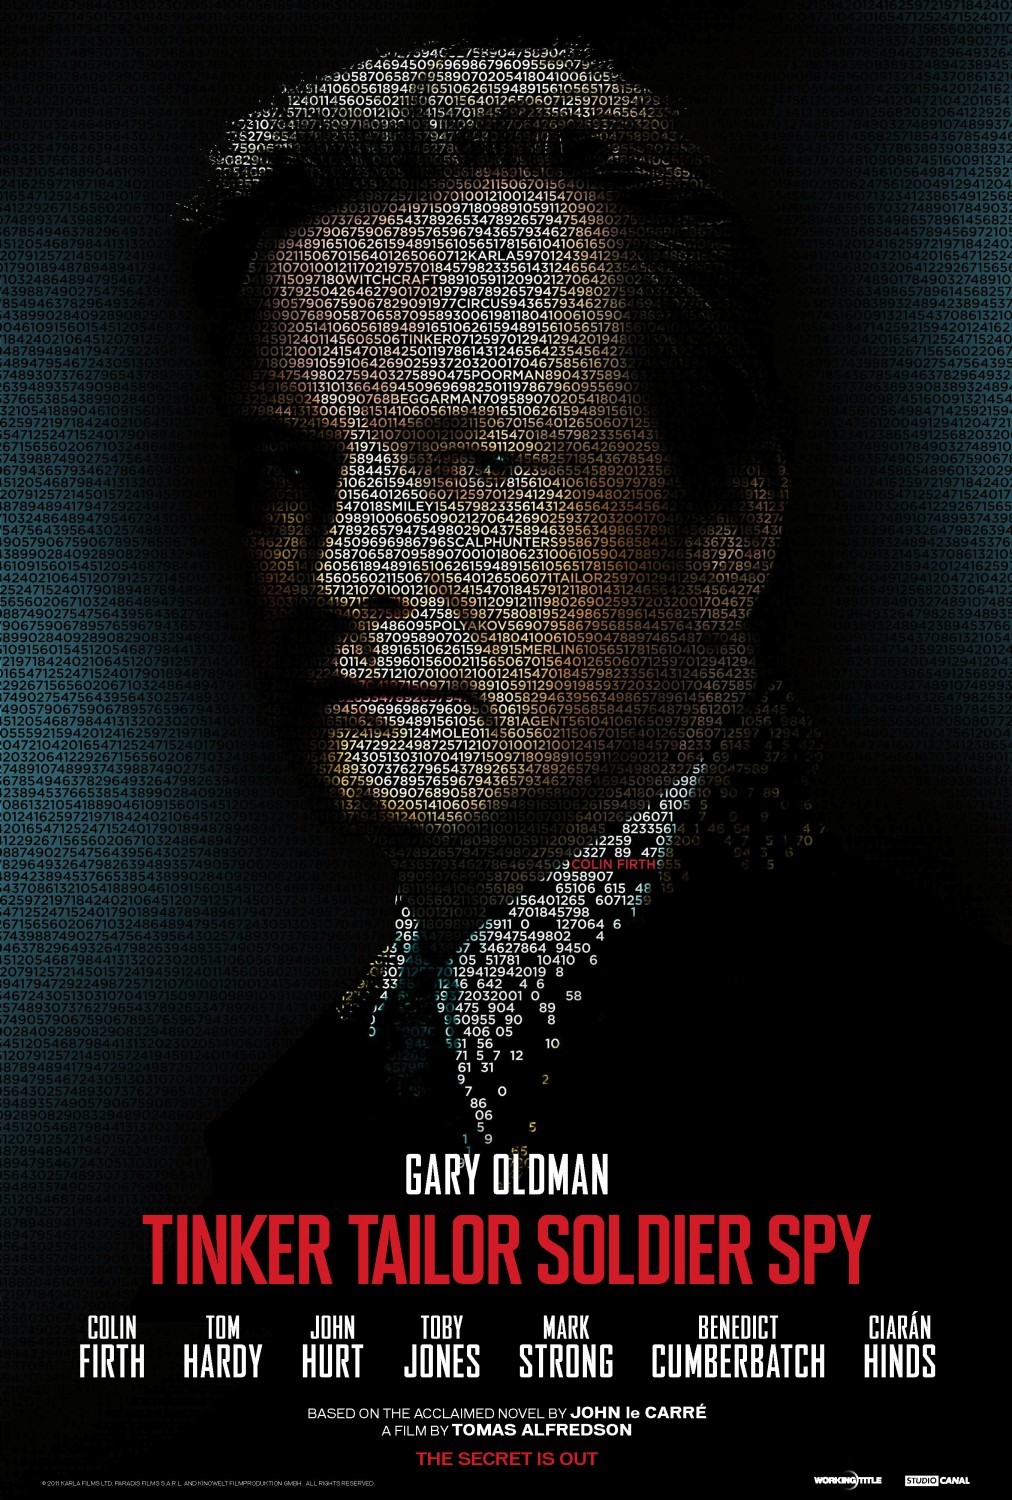 Thinker. Tailor. Soldier. Spy.